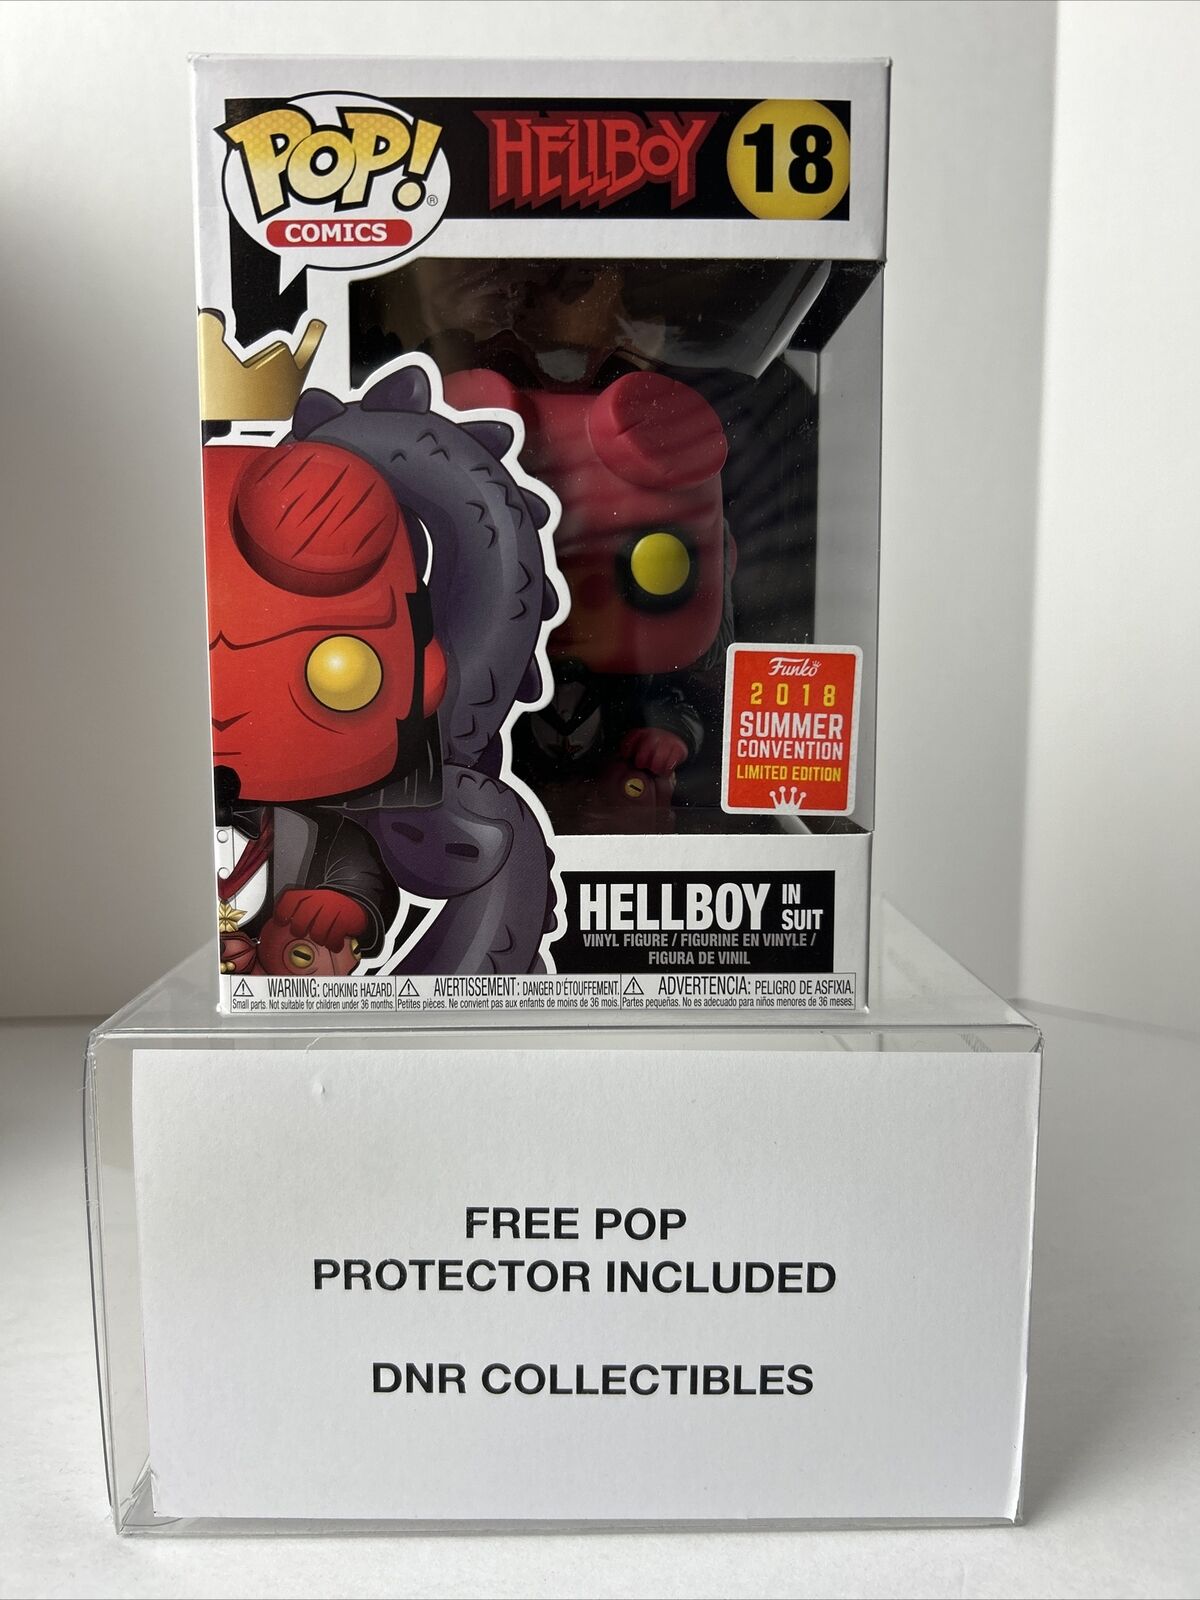 Funko Pop Hellboy #18 Hellboy In Suit 2018 Summer Convention Limited Edition